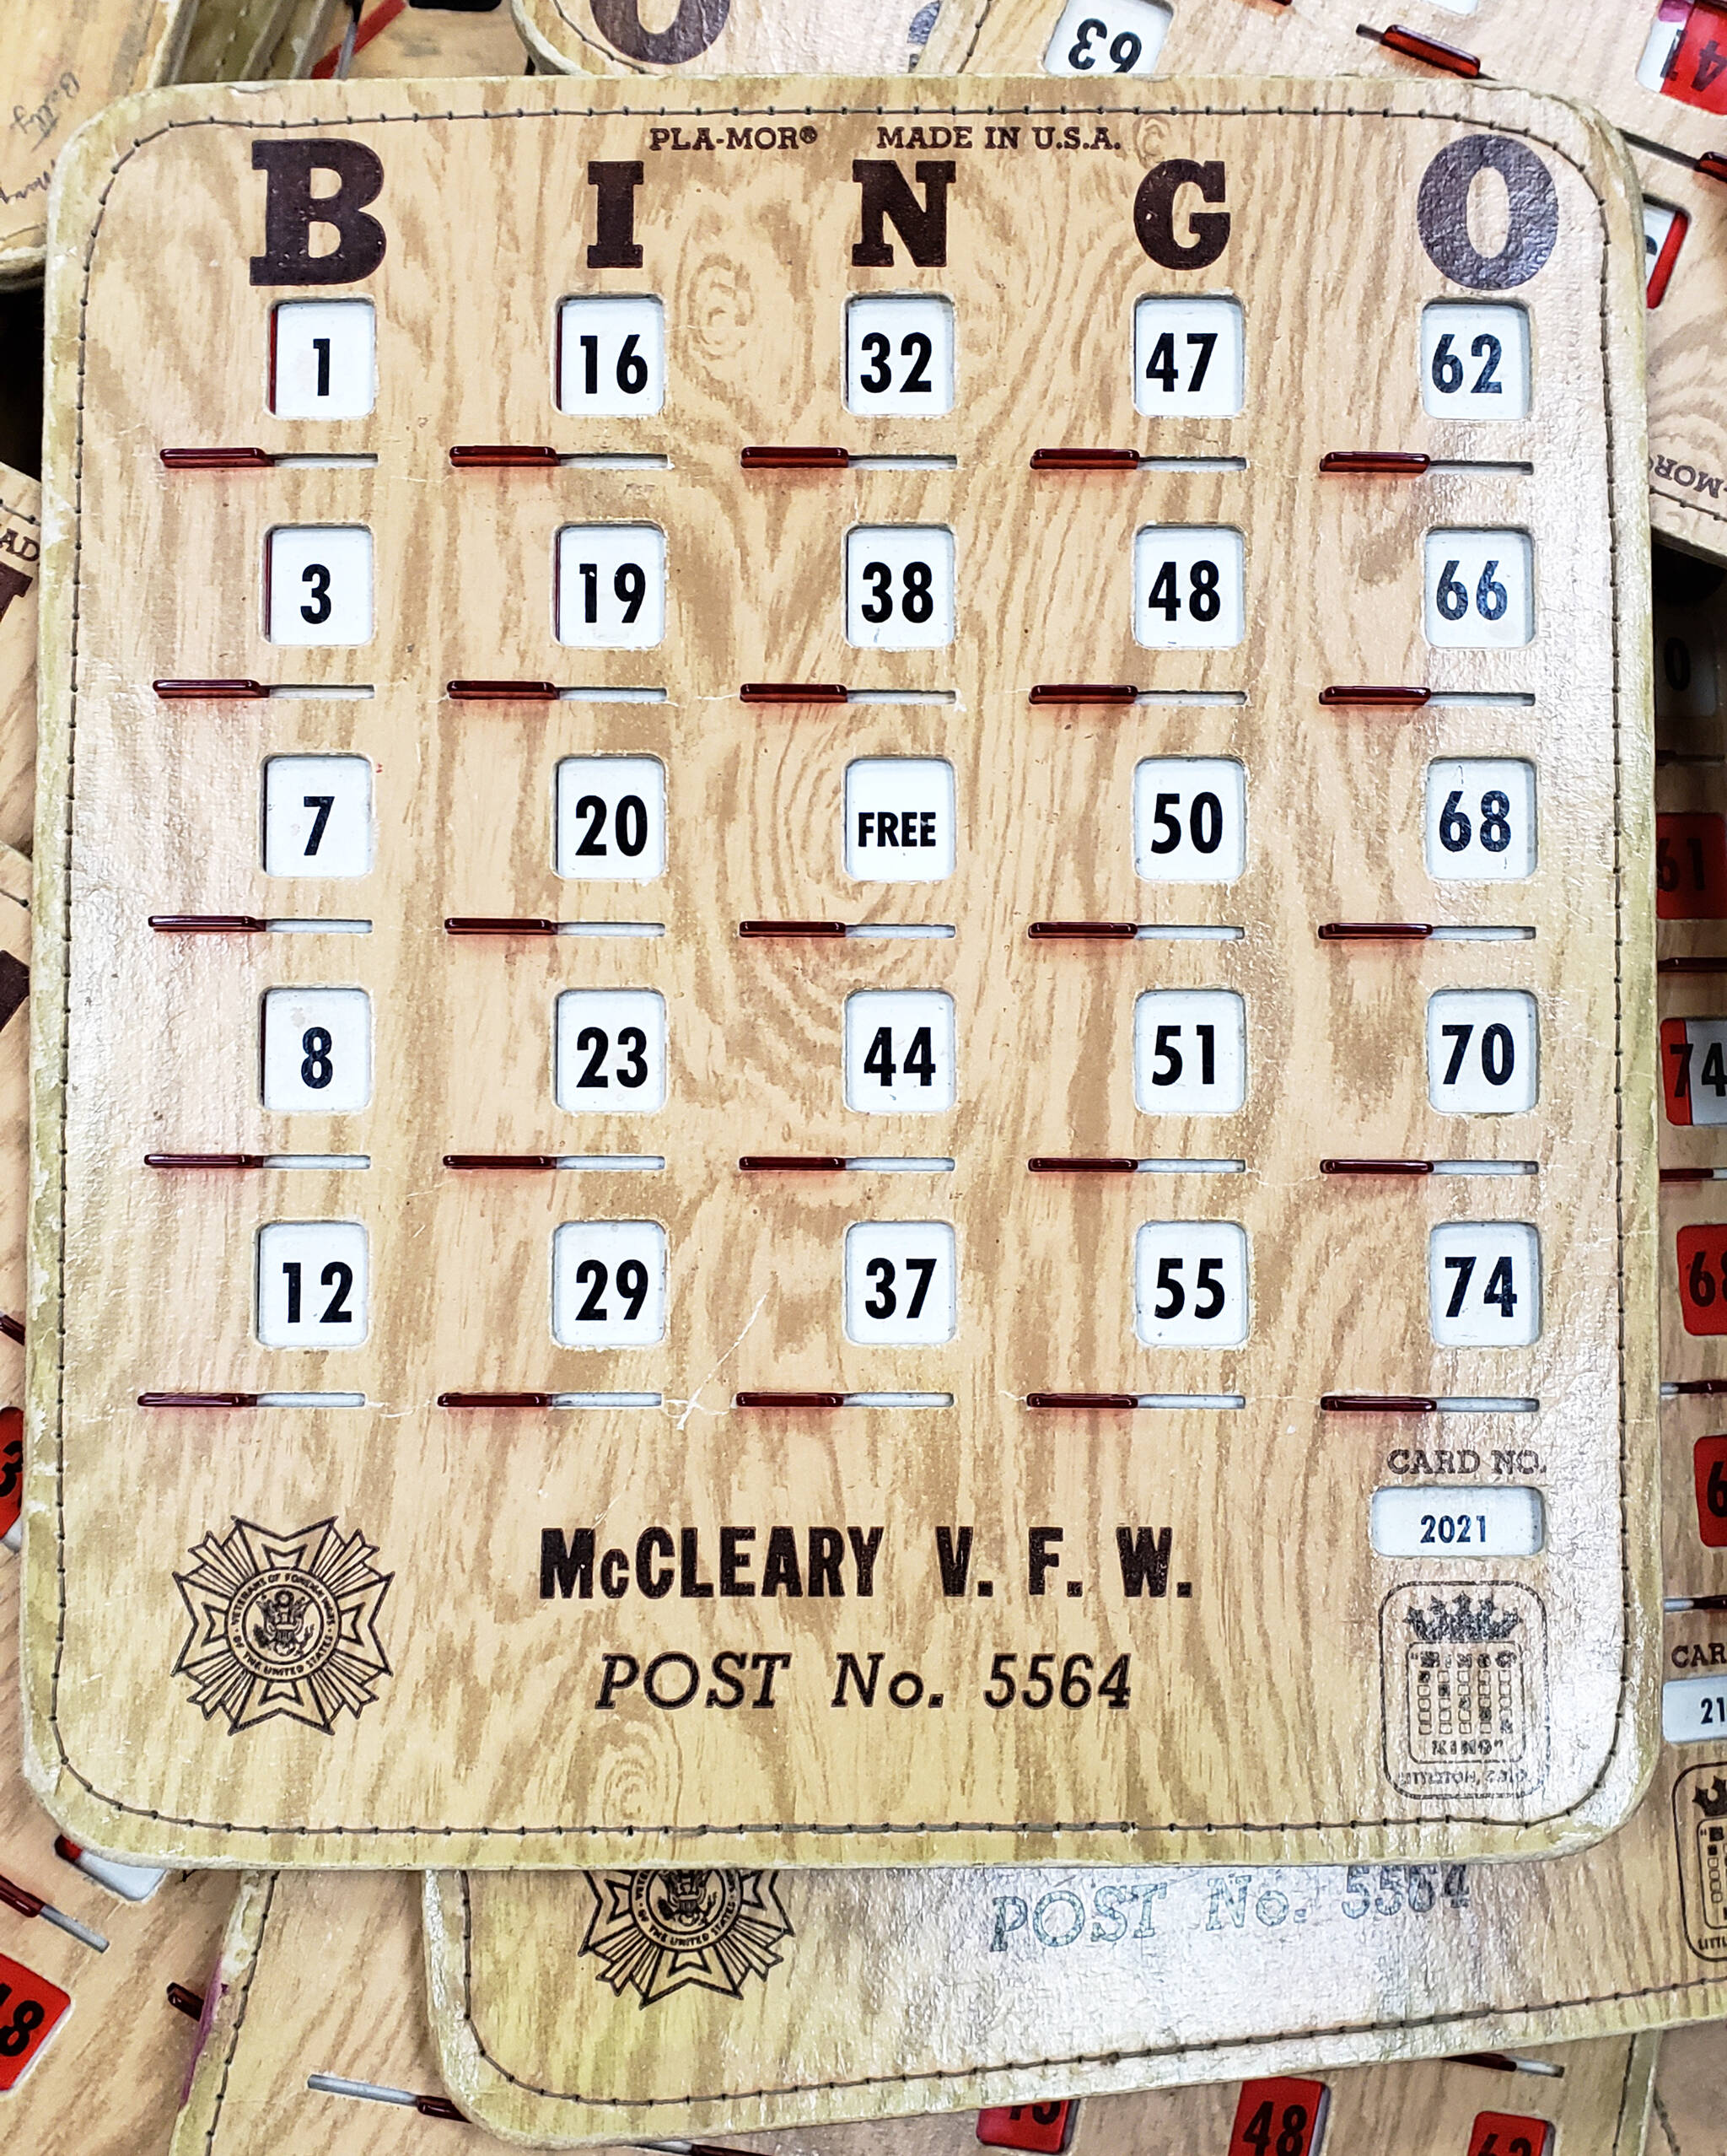 Photo Courtesy of McCleary VFW 
Bring the whole family for affordable fun and see what prizes could await on Saturday, May 14, 2022, at the McCleary Bingo Night in McCleary.